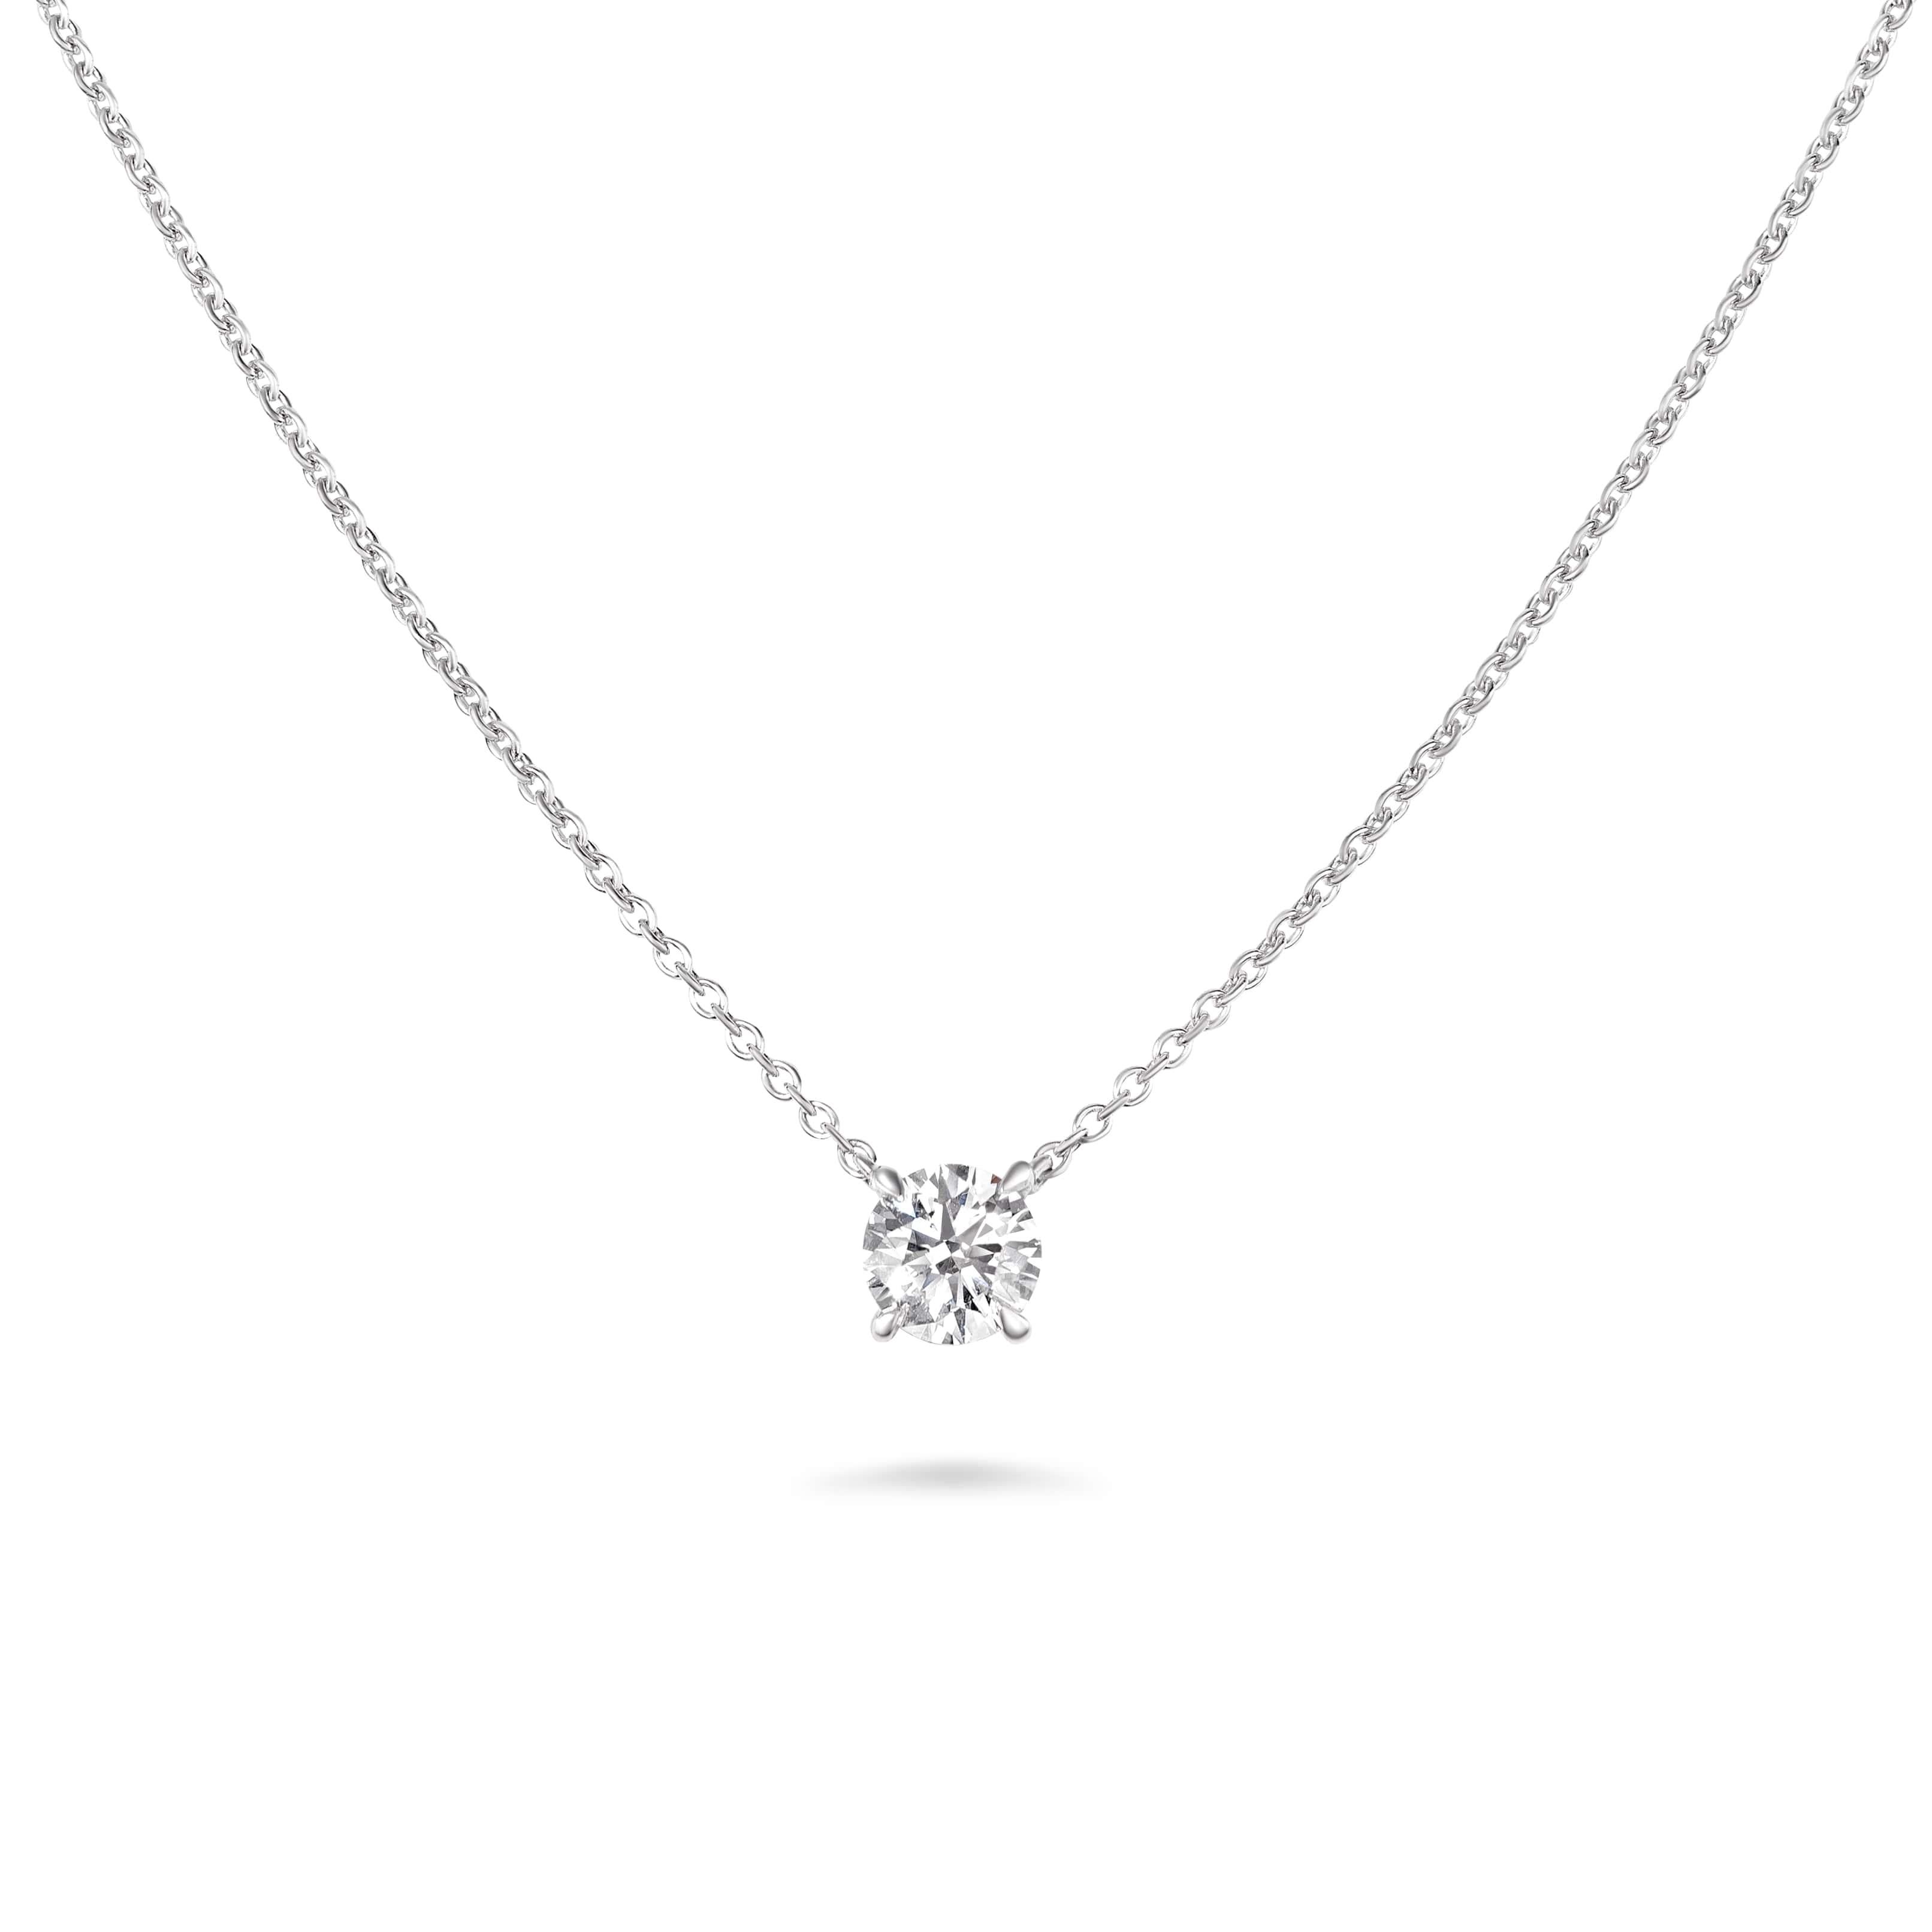 The pendant's design encapsulates modern grace, allowing the diamond's luminosity to take centre stage while exuding an air of understated opulence. The 18ct white gold chain further enhances the necklace's allure, draping delicately around the neck